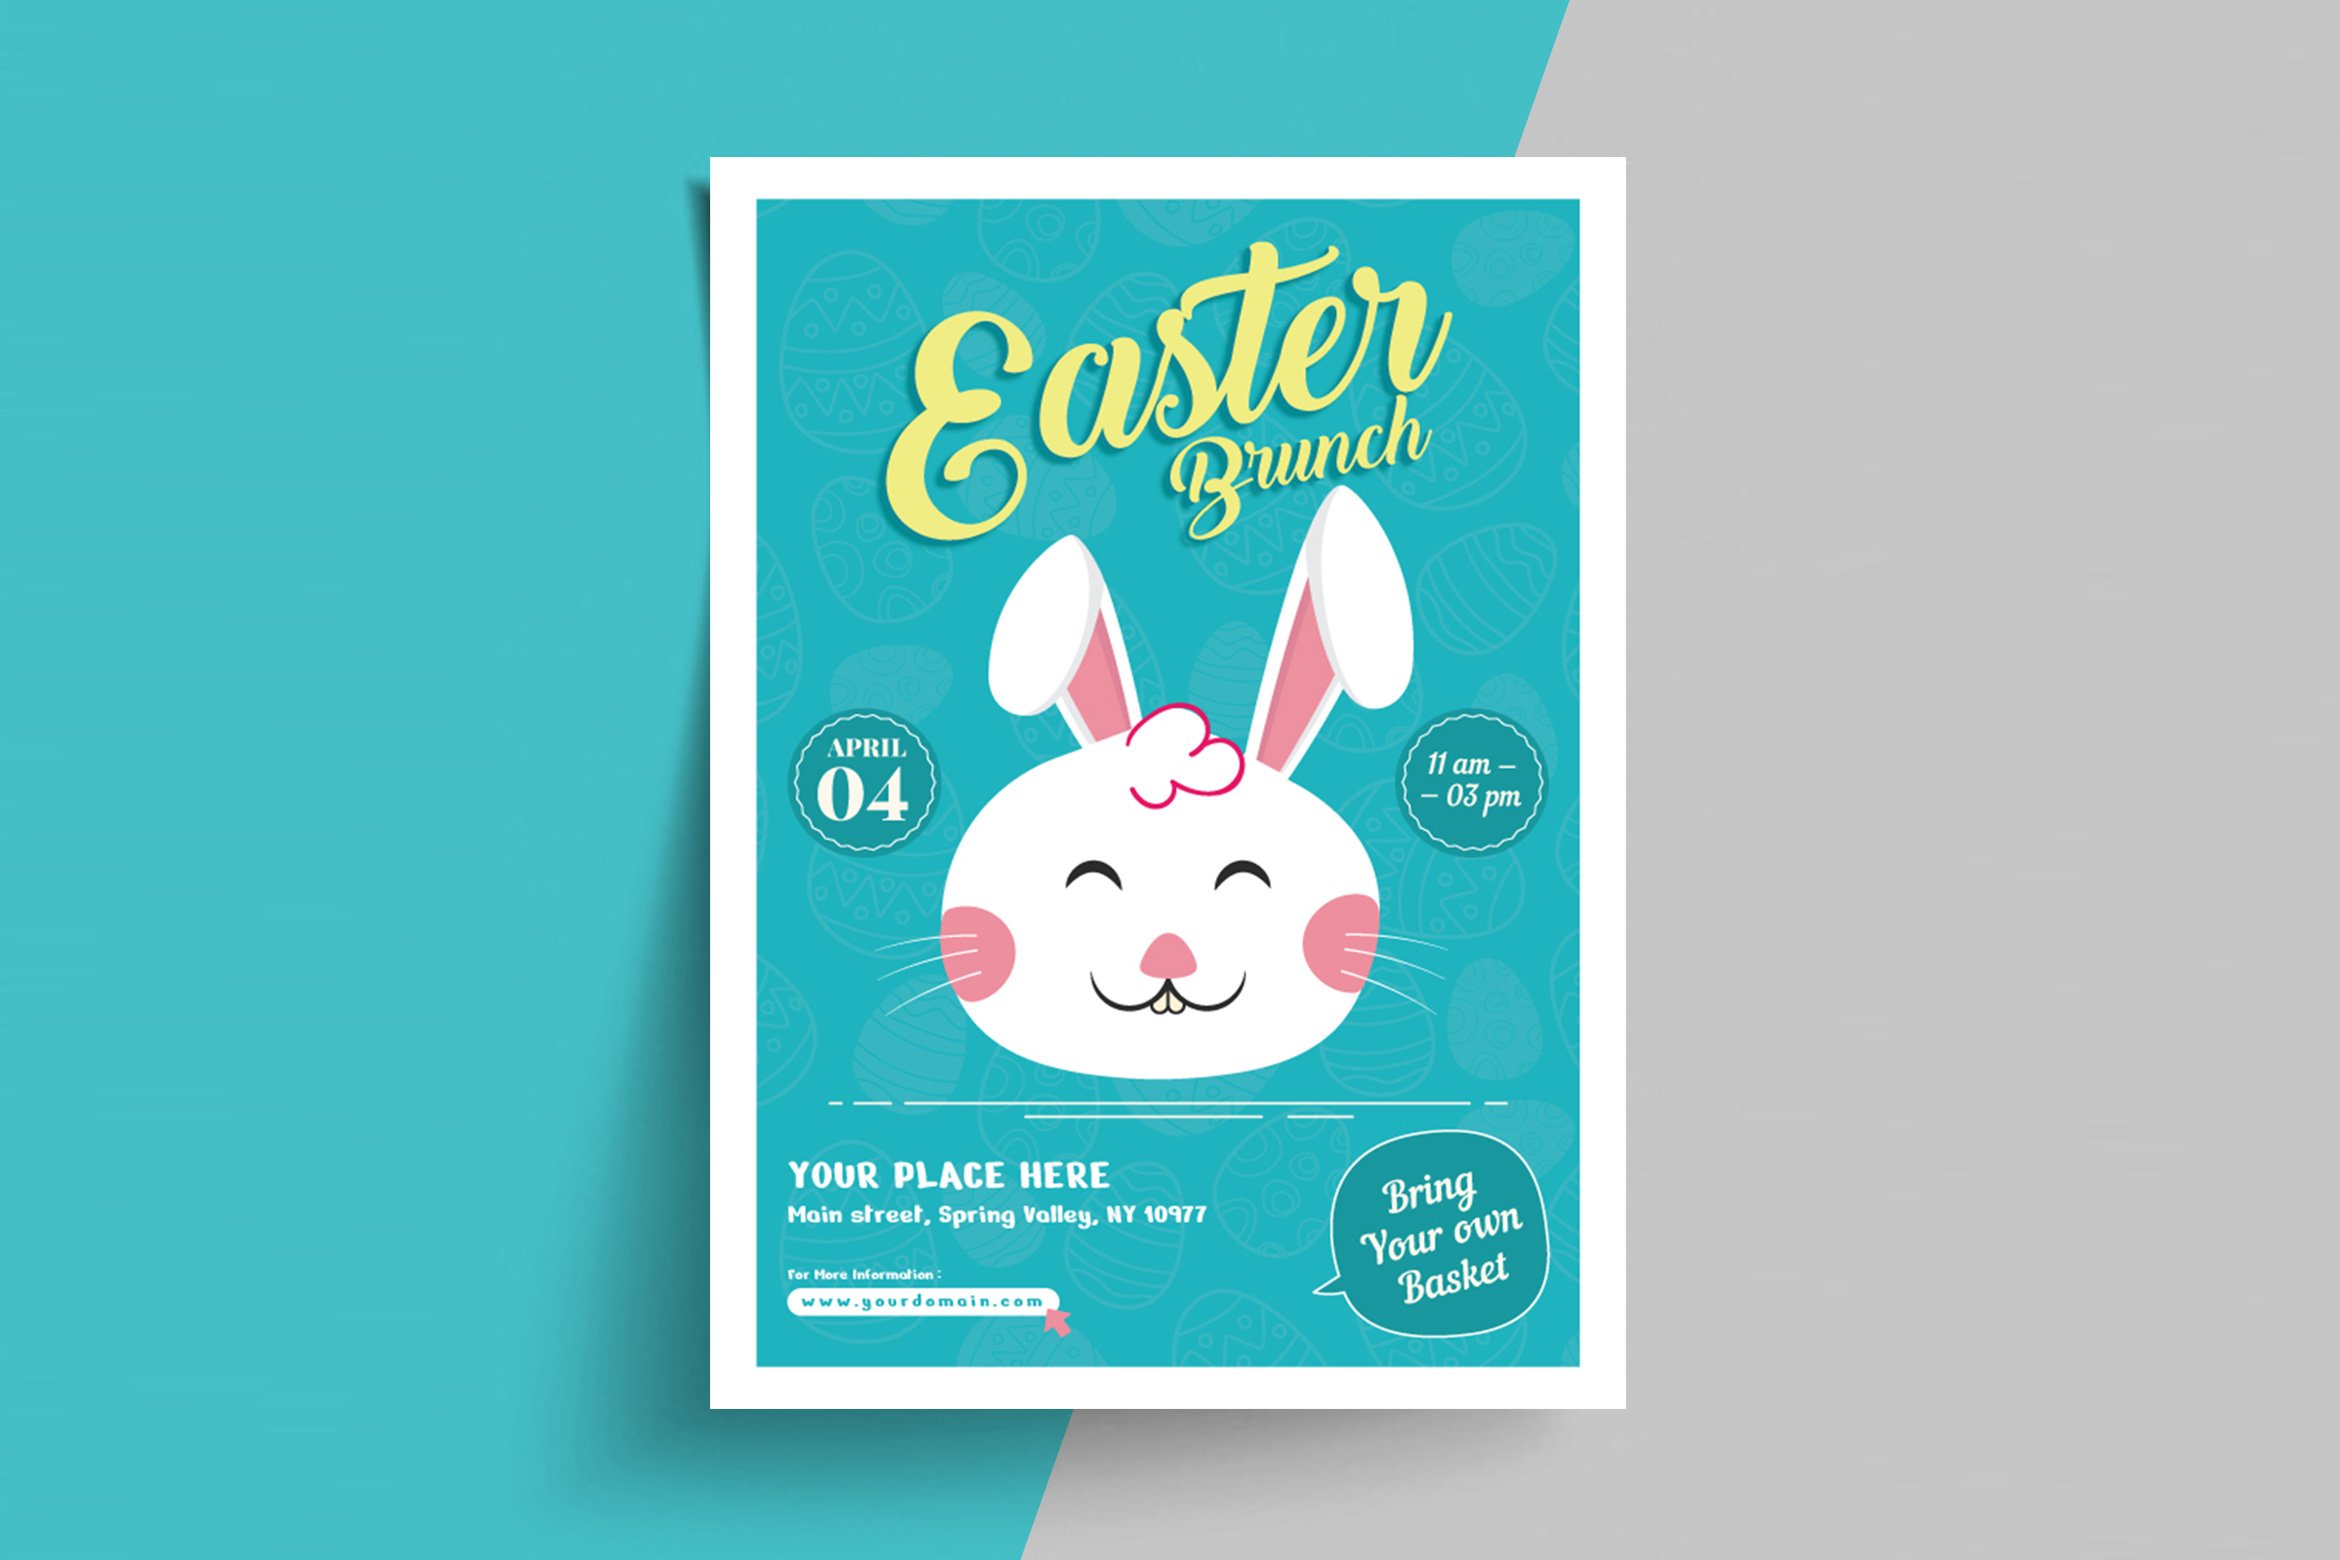 Easter Day Flyer Template